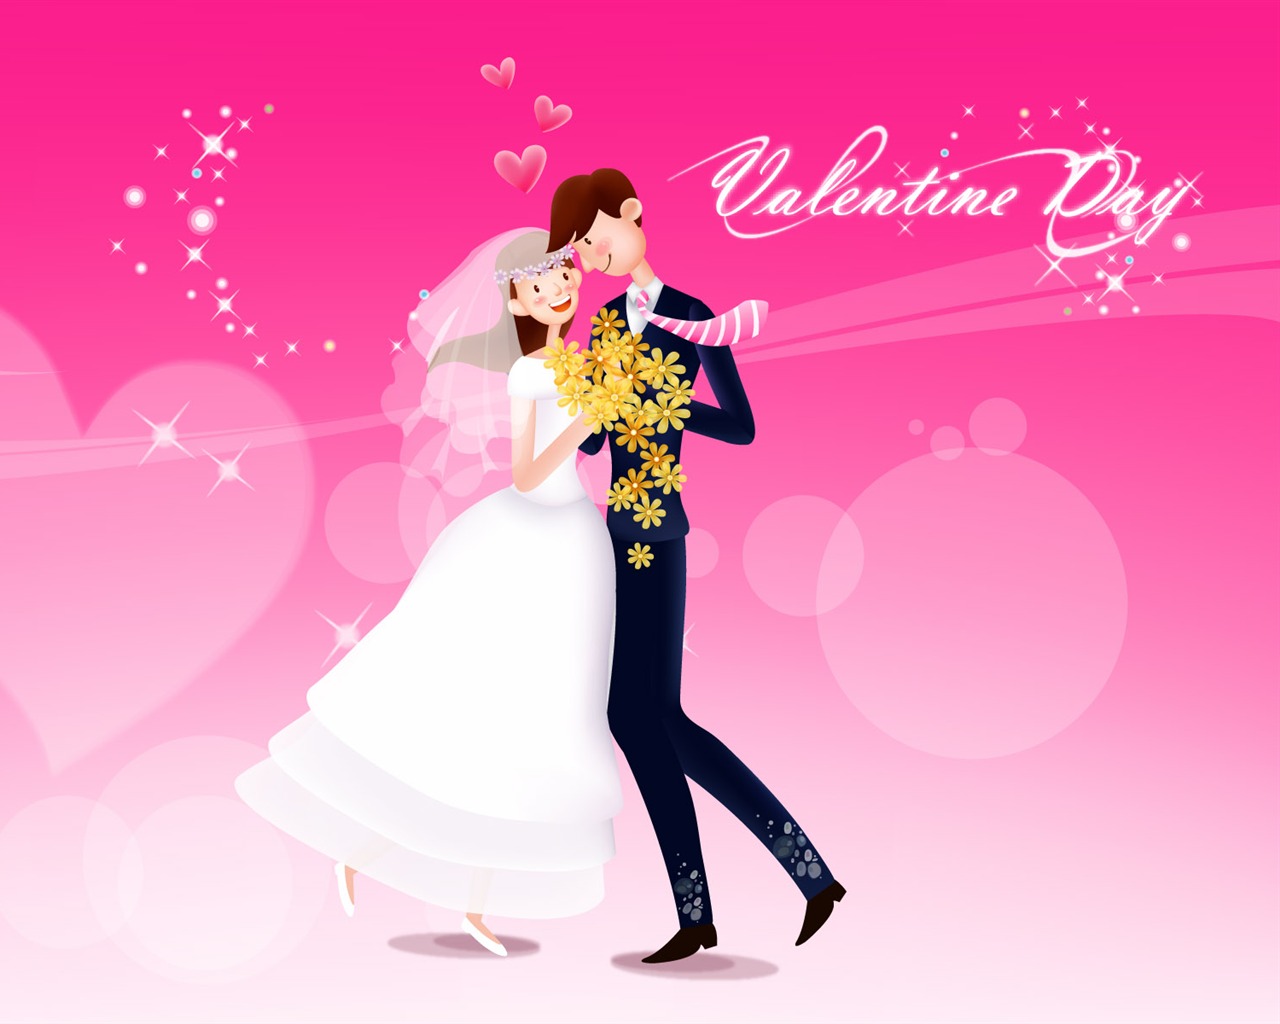 Valentine's Day Theme Wallpapers (2) #16 - 1280x1024